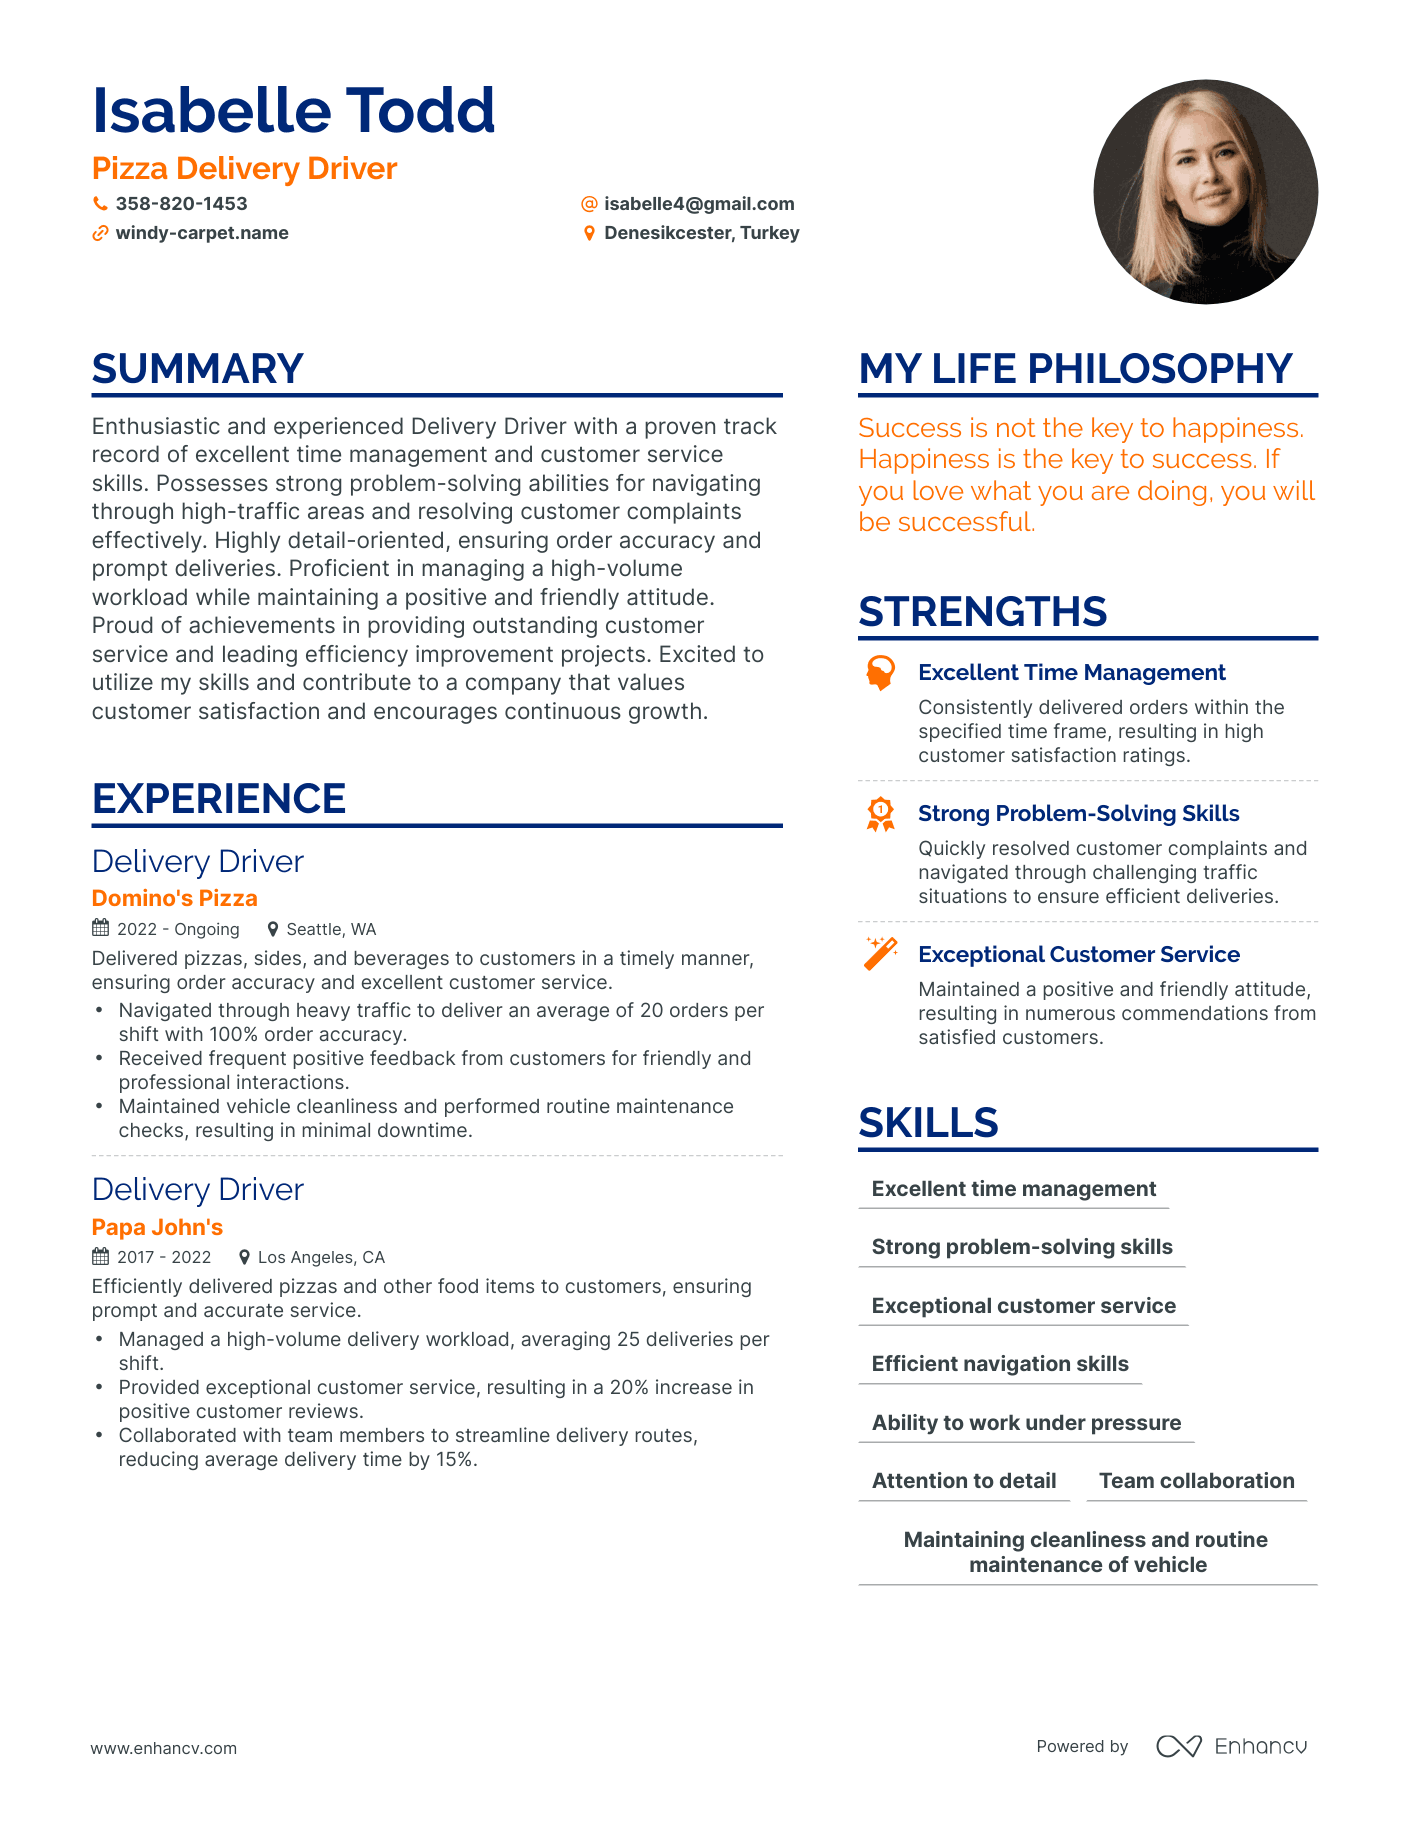 Pizza Delivery Driver resume example